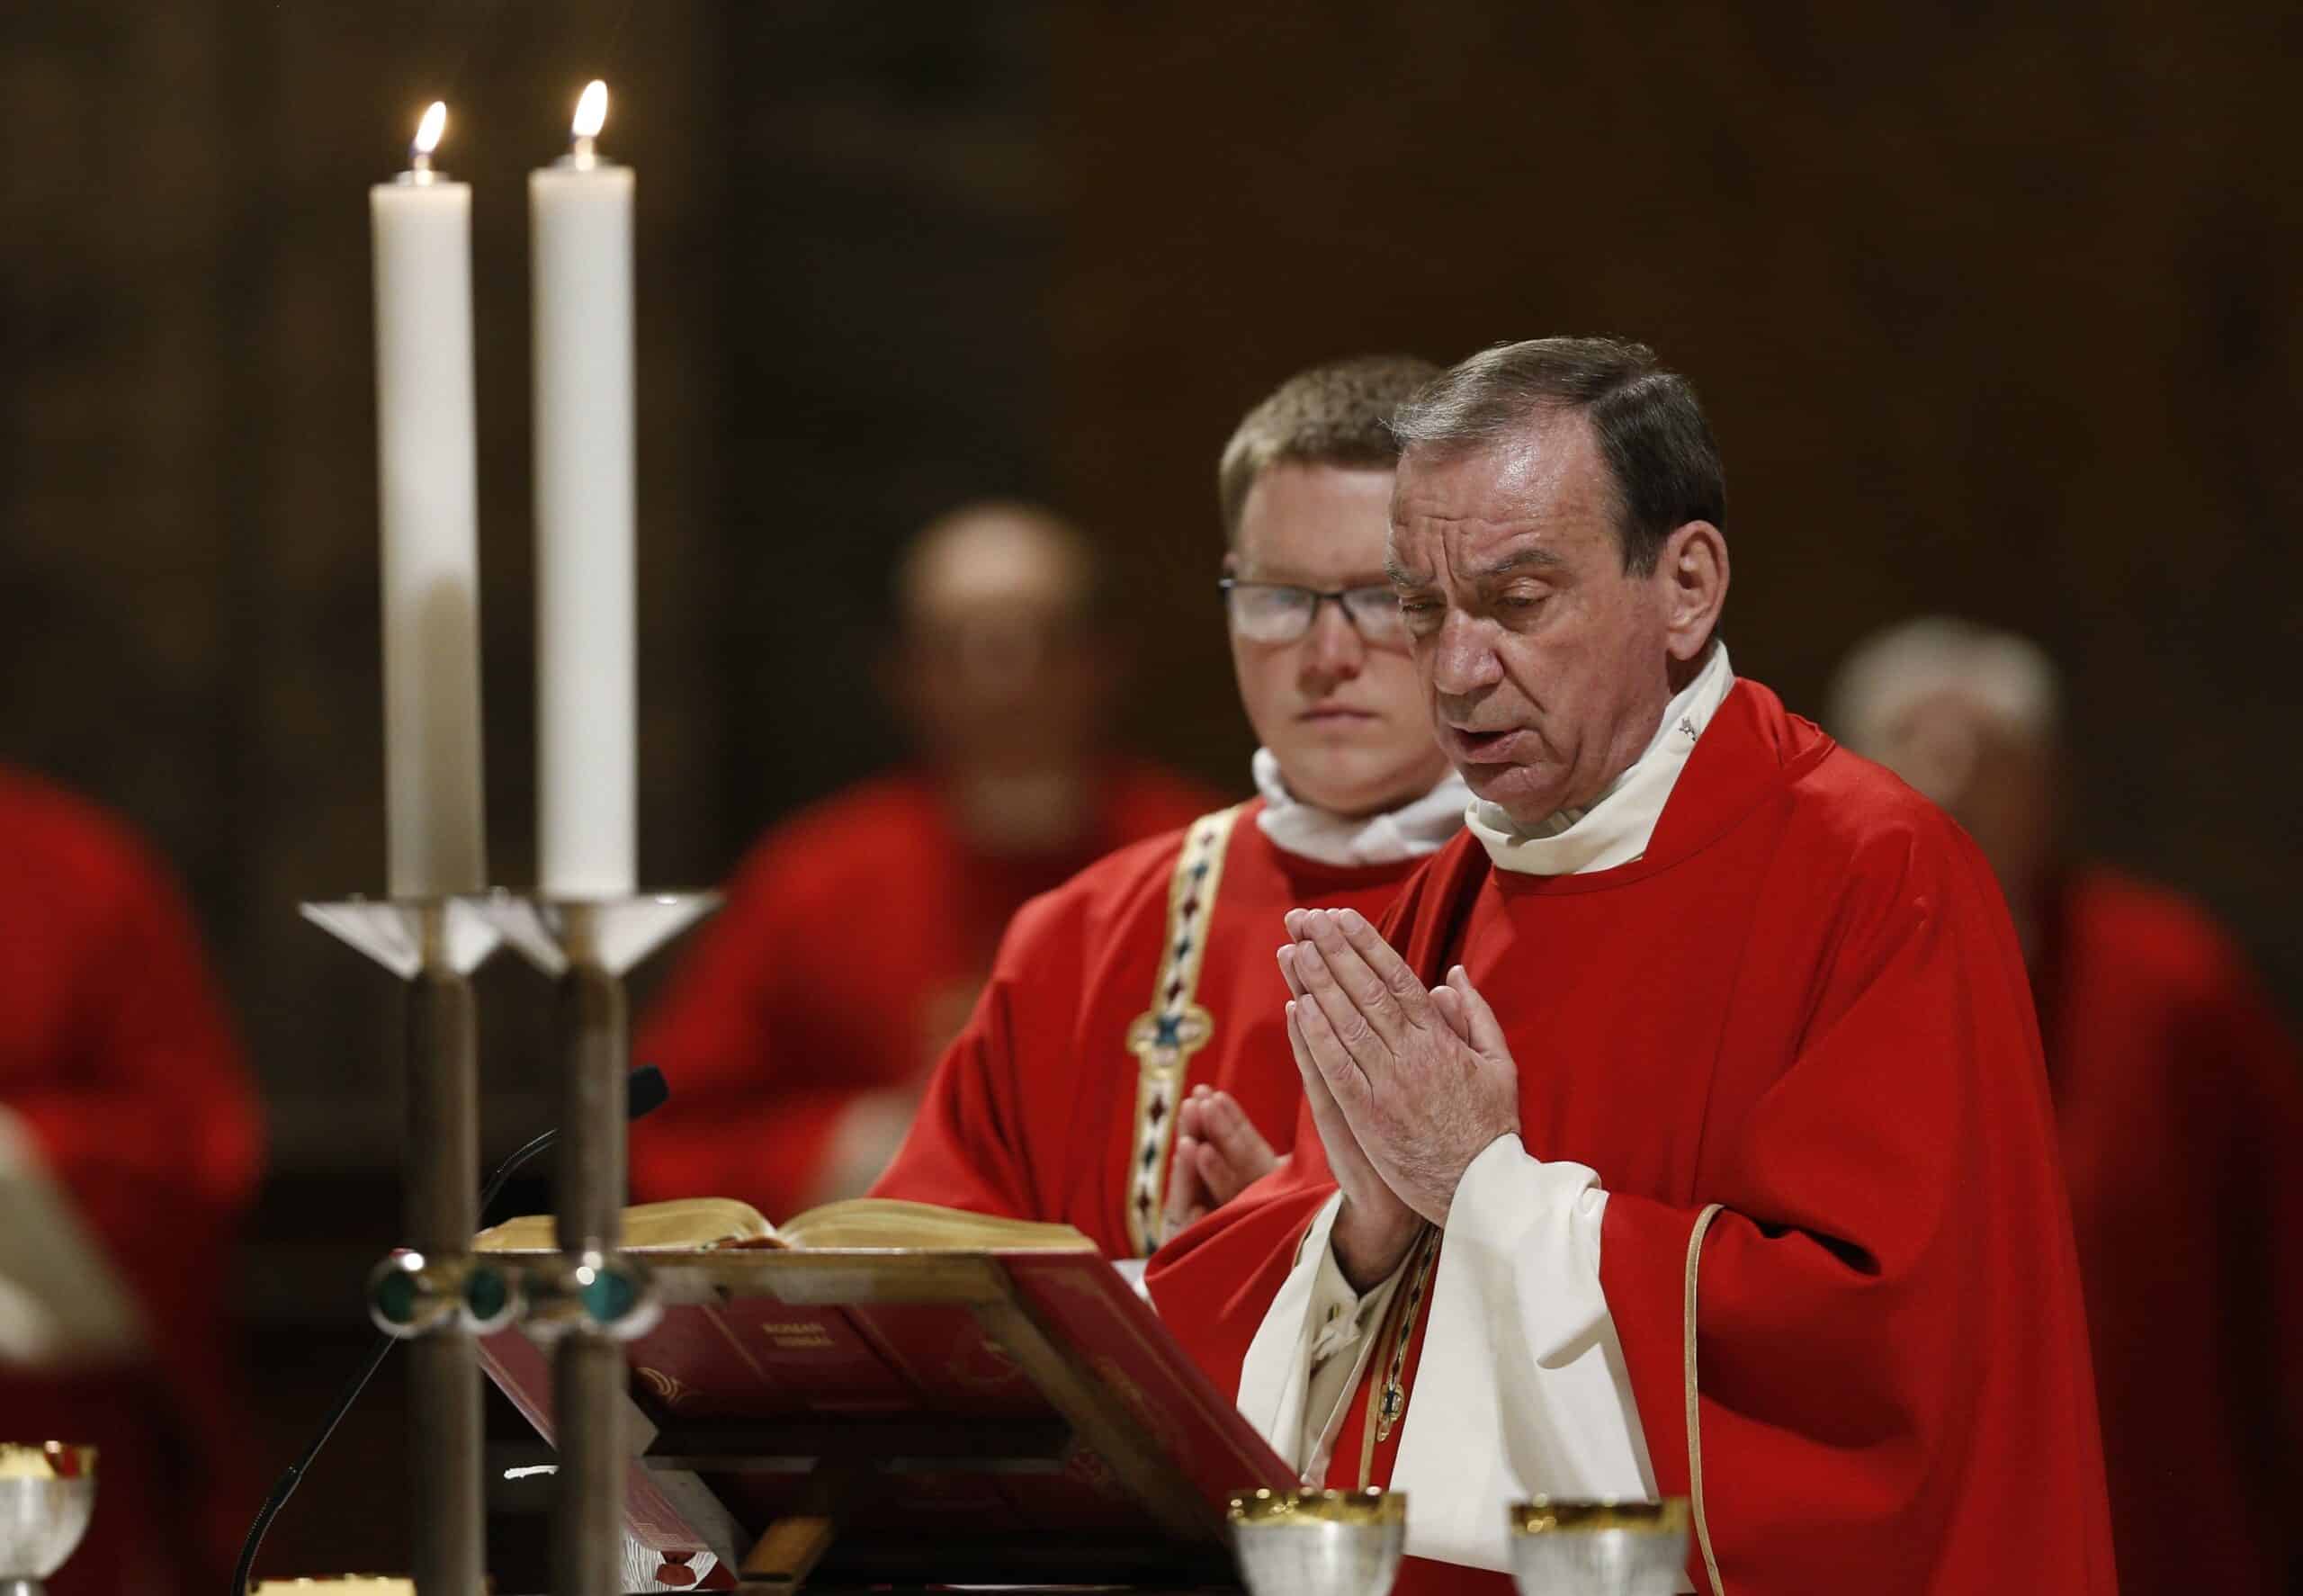 Archbishop Dennis M. Schnurr of Cincinnati concelebrates Mass with other U.S. bishops from Ohio and Michigan at the Basilica of St. Paul Outside the Walls in Rome Dec. 11, 2019. The archbishop sent letter to the faithful opposing a proposed abortion amendment on the Ohio November ballot. (CNS photo/Paul Haring)